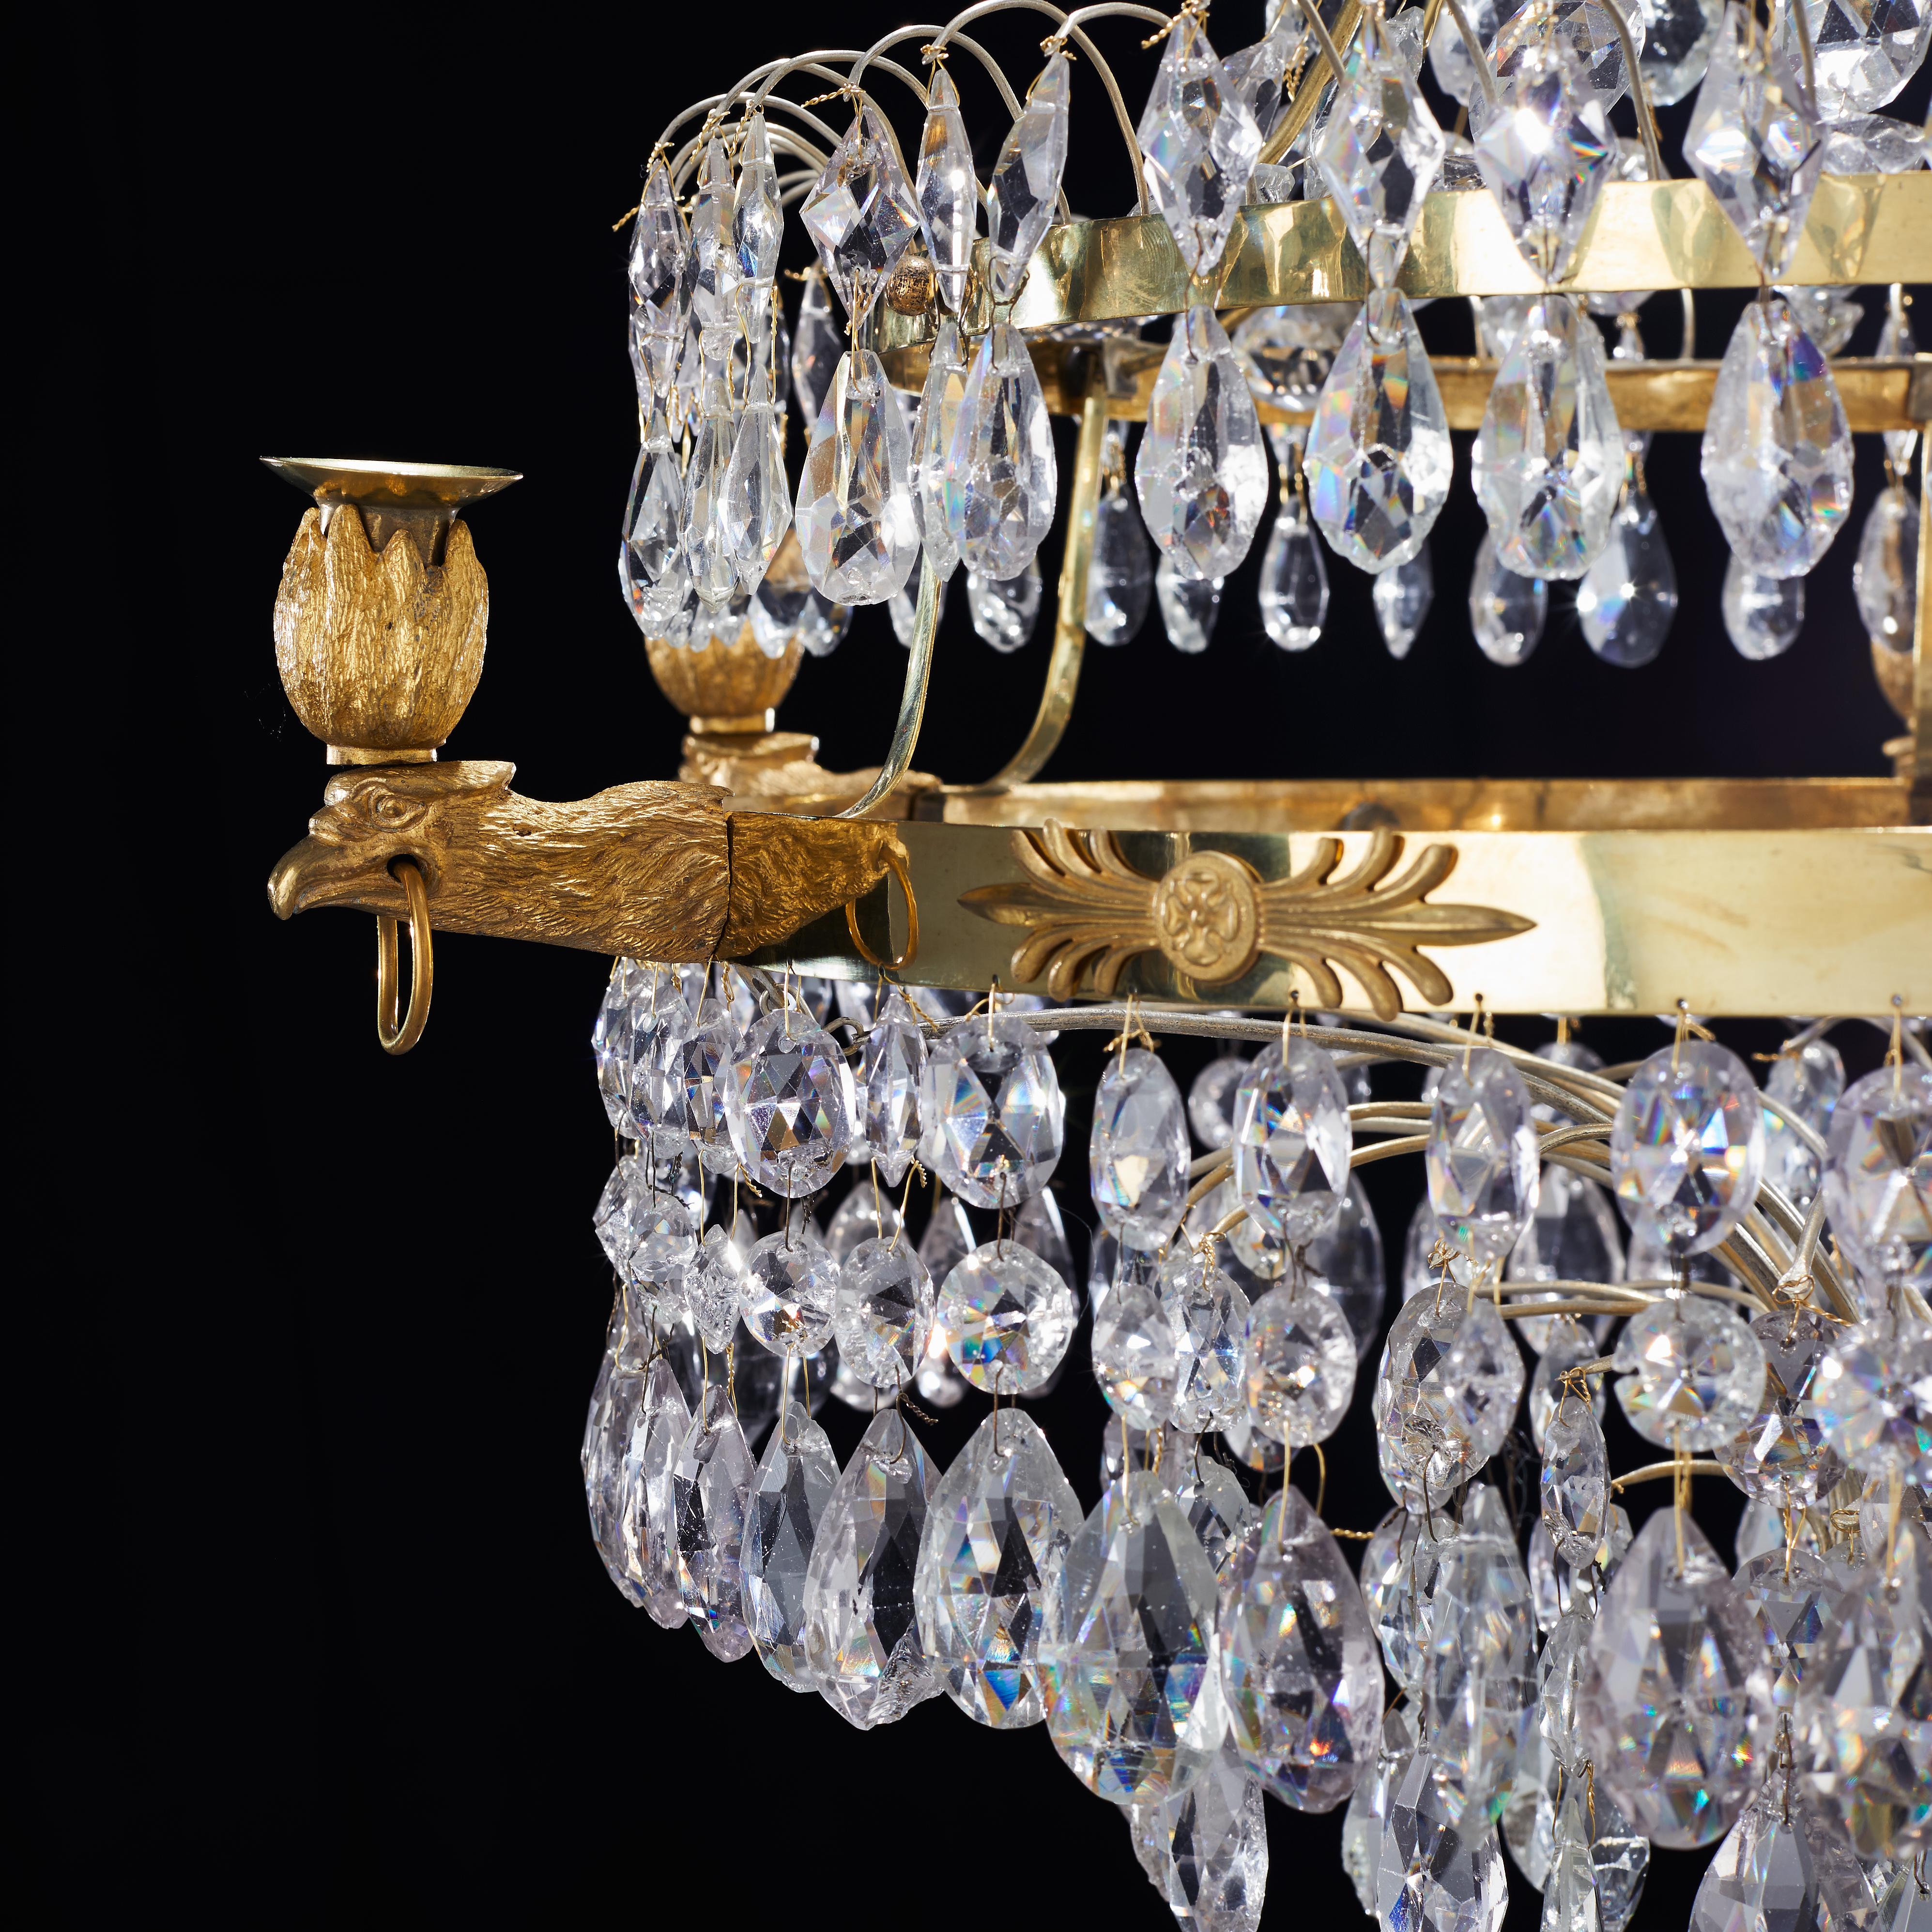 An unusual Swedish crystal and gilt bronze Empire chandelier made in Stockholm, early 19th century. 6 candles plus 1 in the middle.